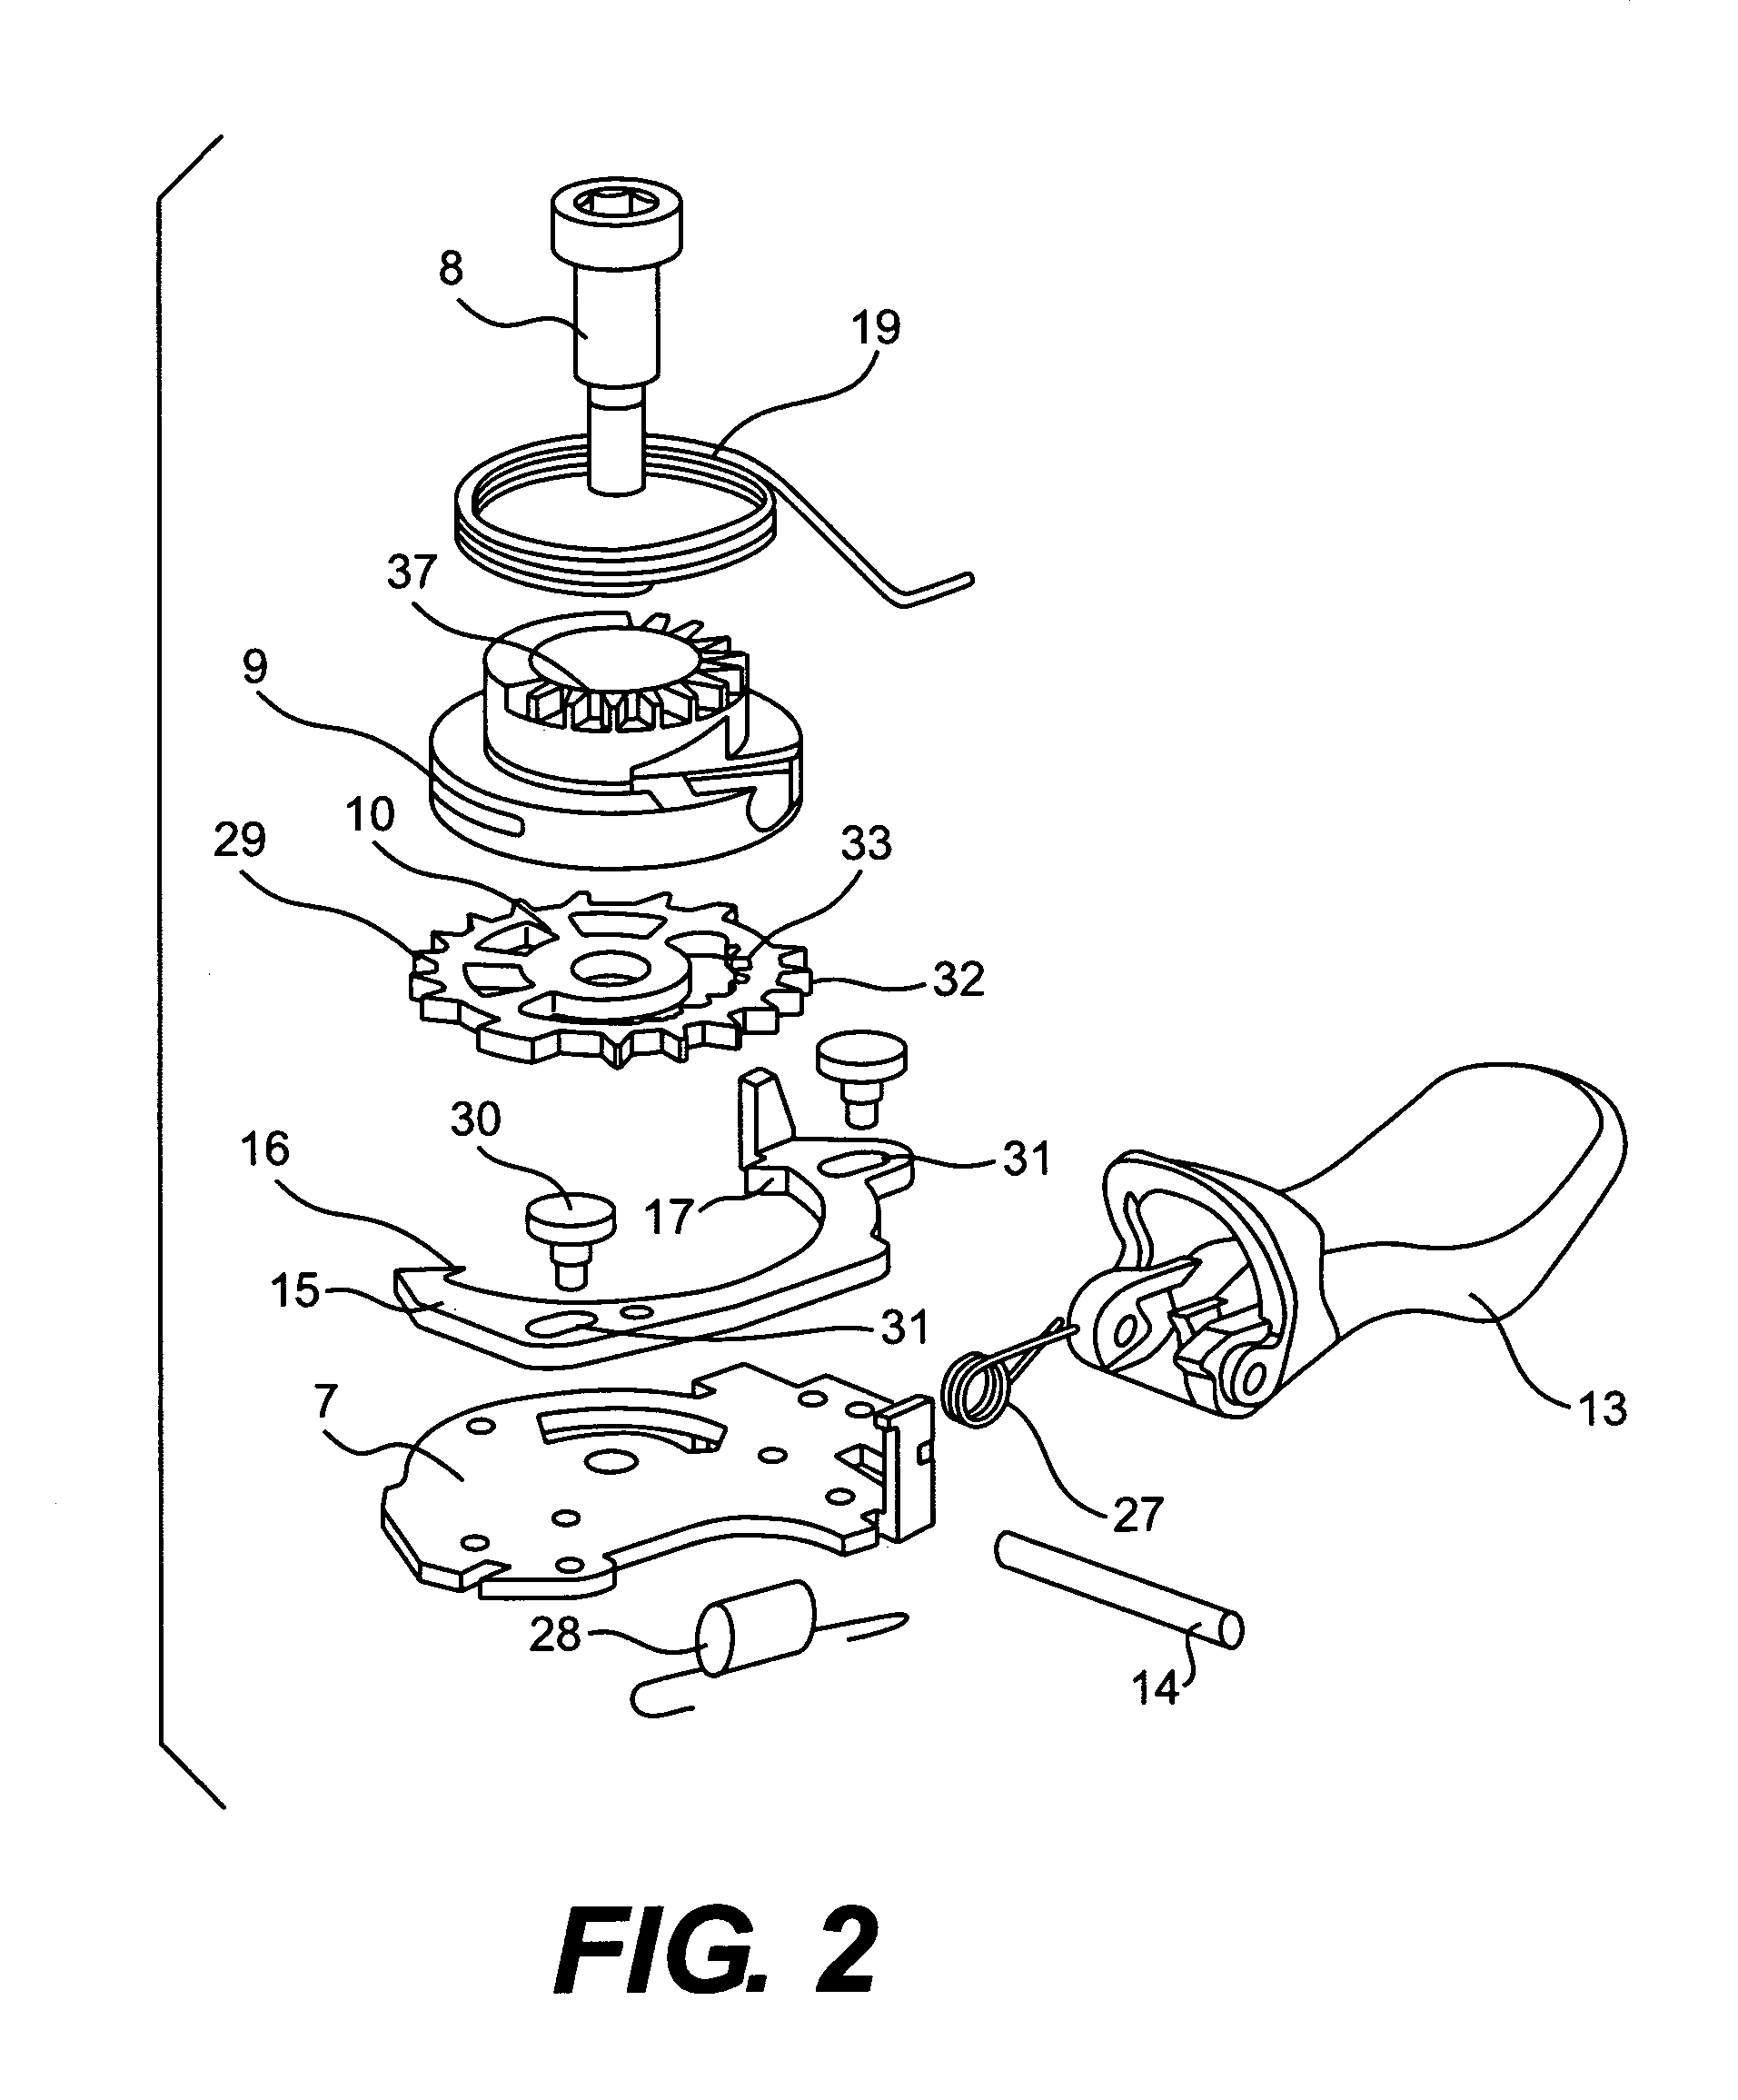 Cable retraction mechanism for trigger shifters